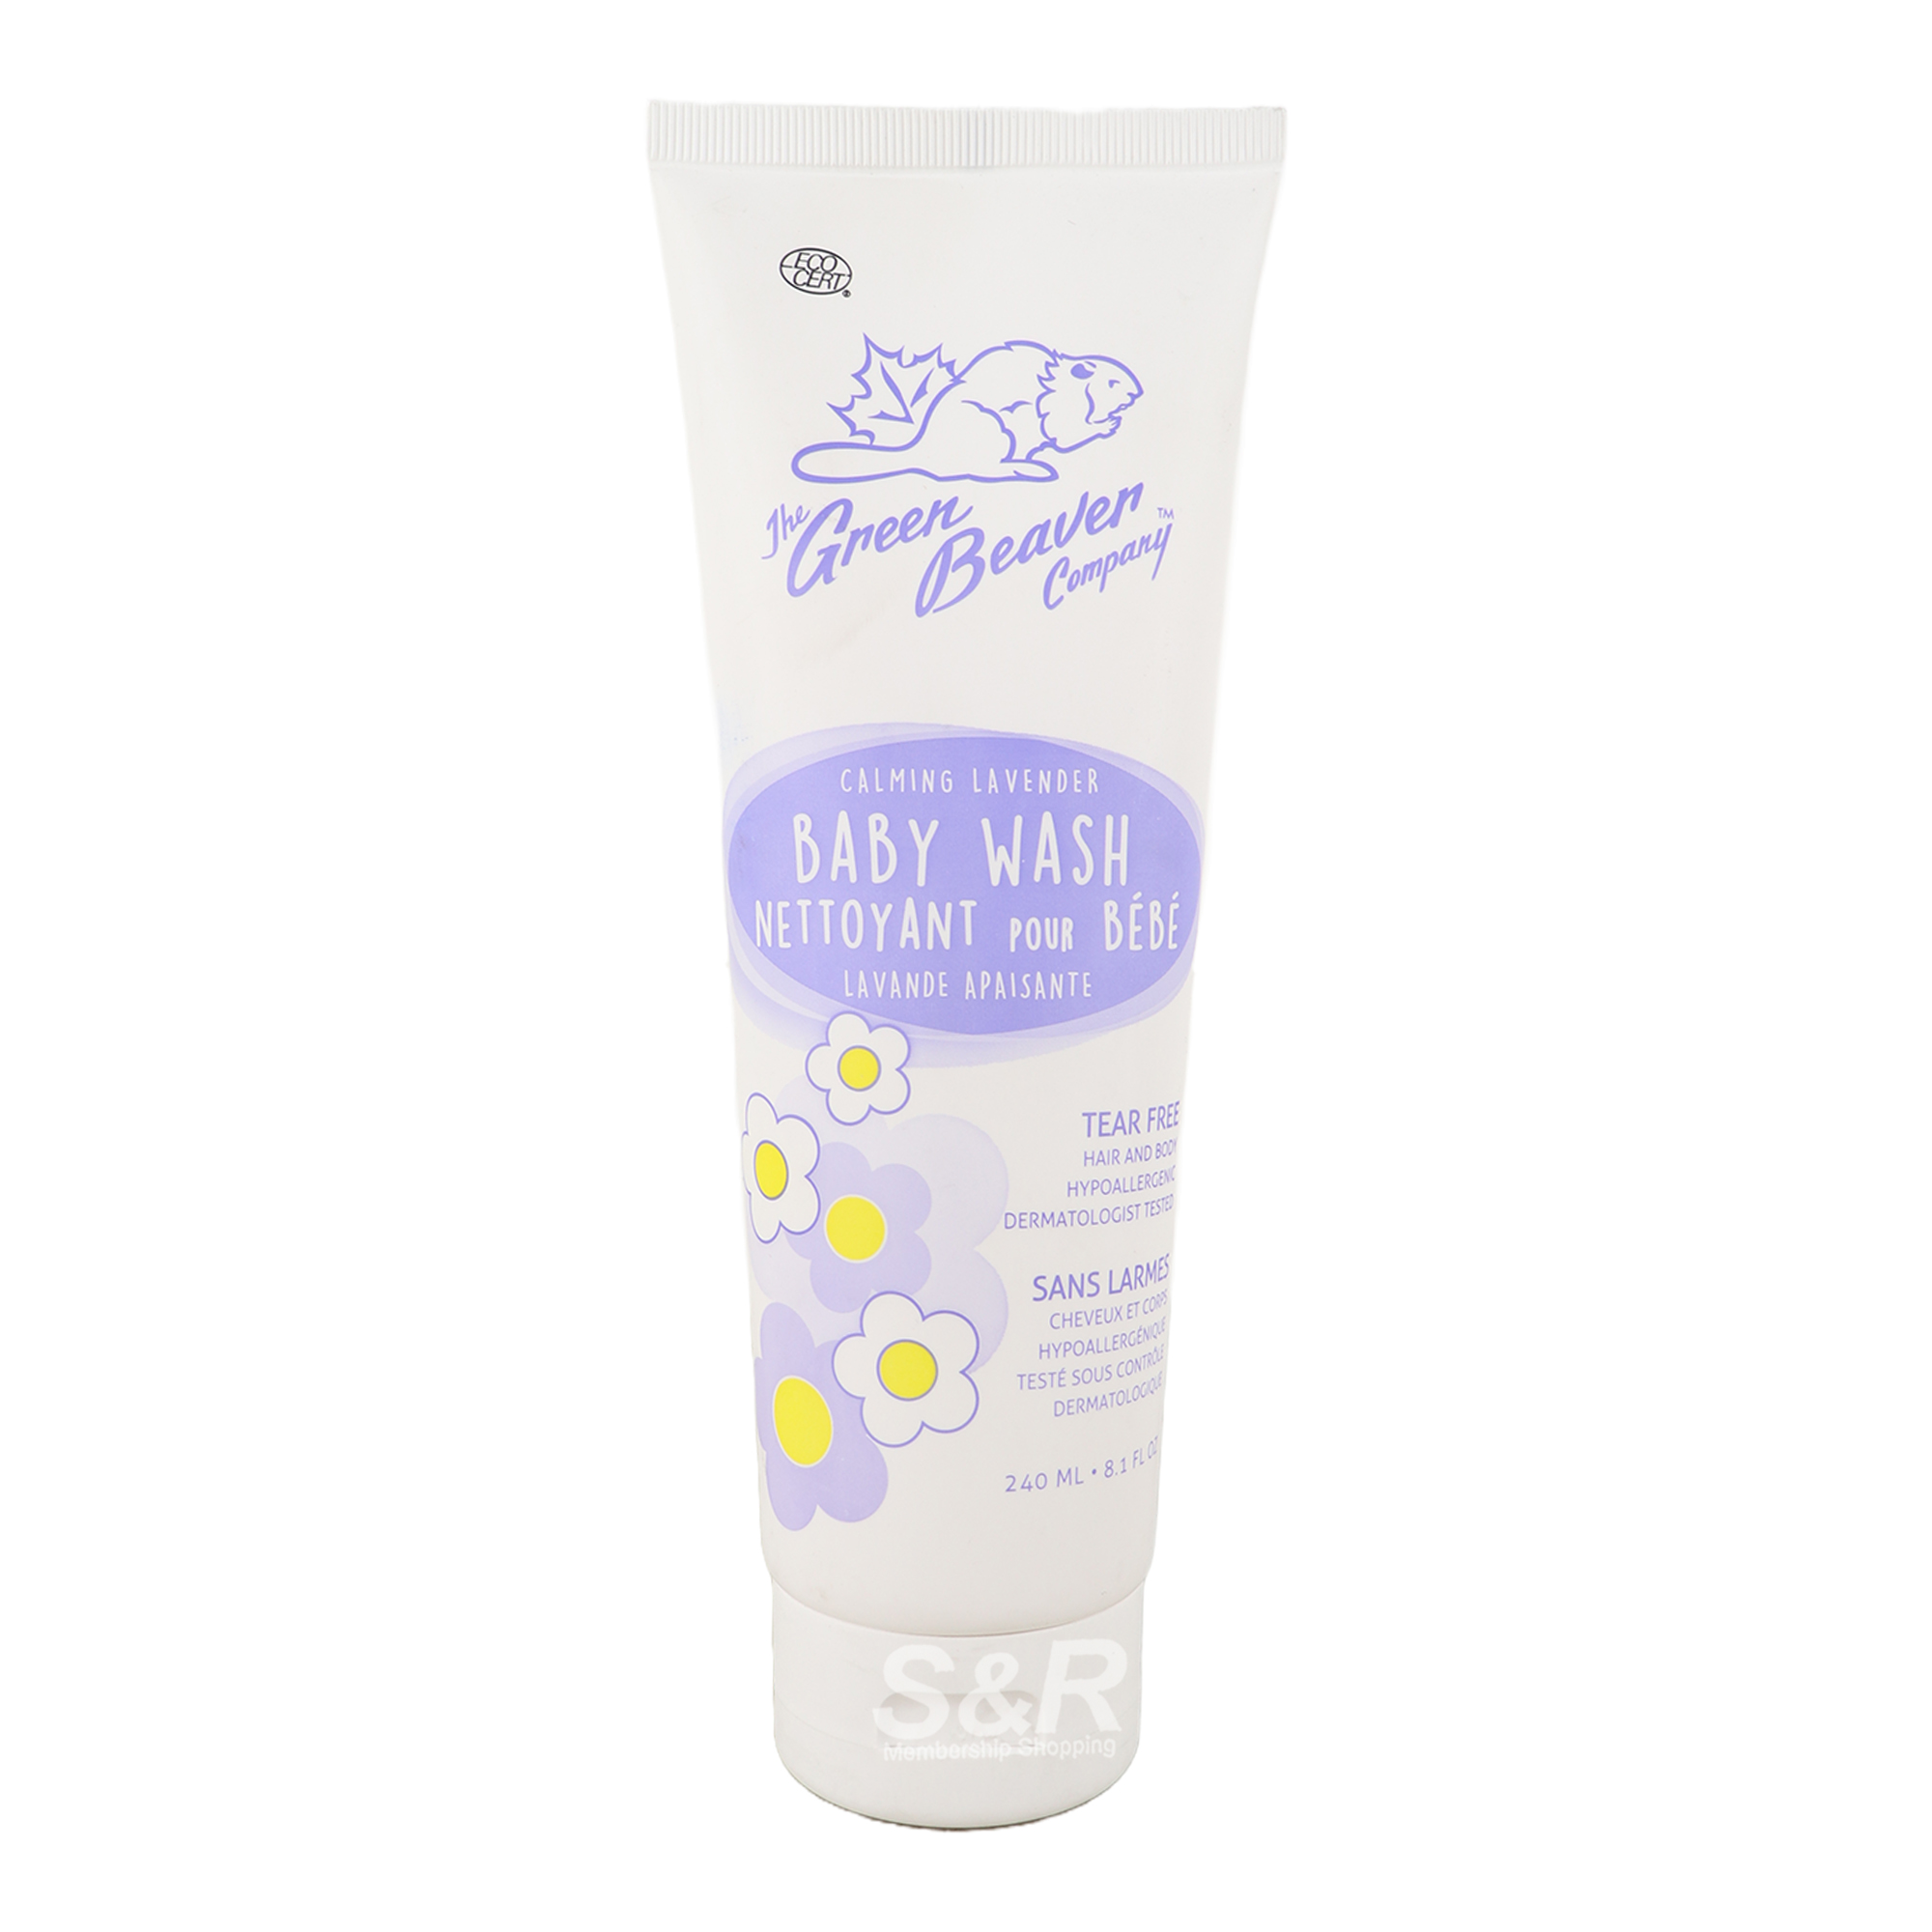 The Green Beaver Company Calming Lavender Baby Wash 240mL